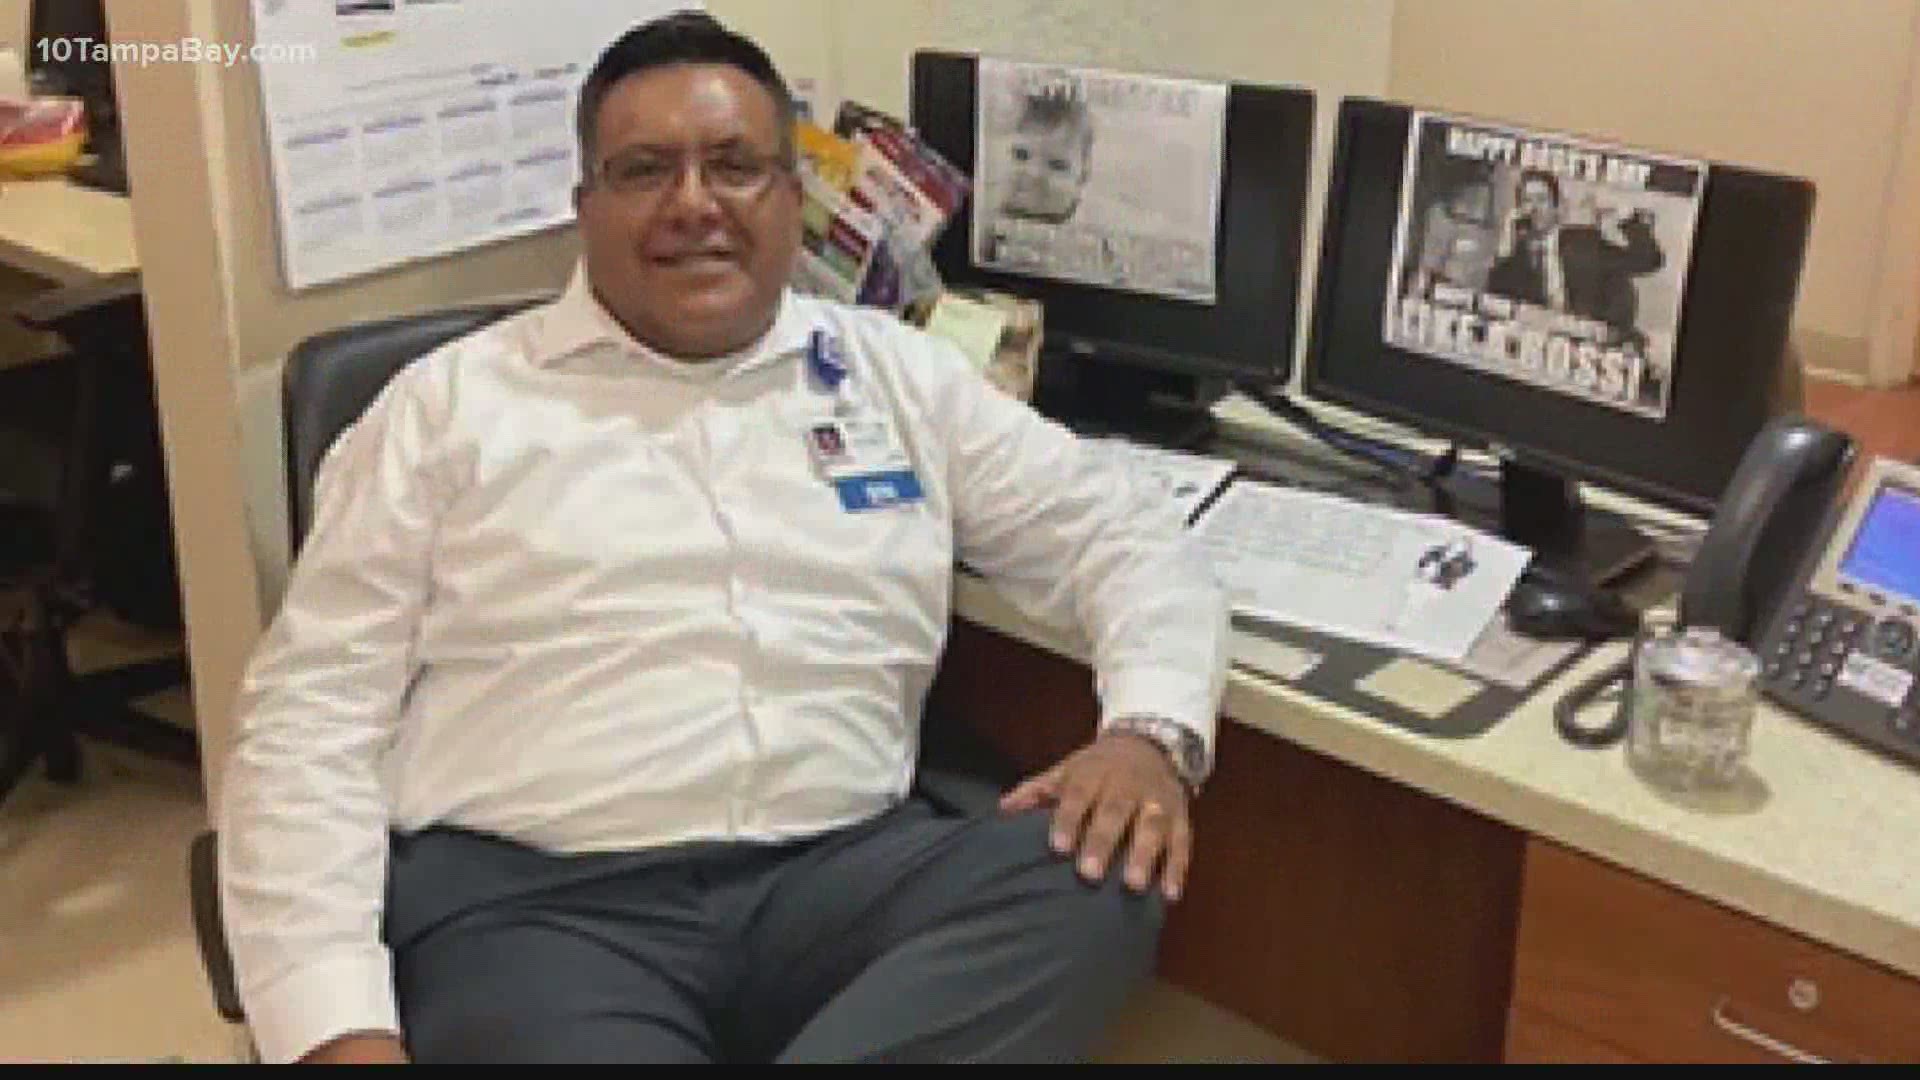 Moffitt Cancer Center nurse Leo Begazo came close to death when he fought COVID-19 in April. His doctor tried an experimental drug and called it 'a miracle.'